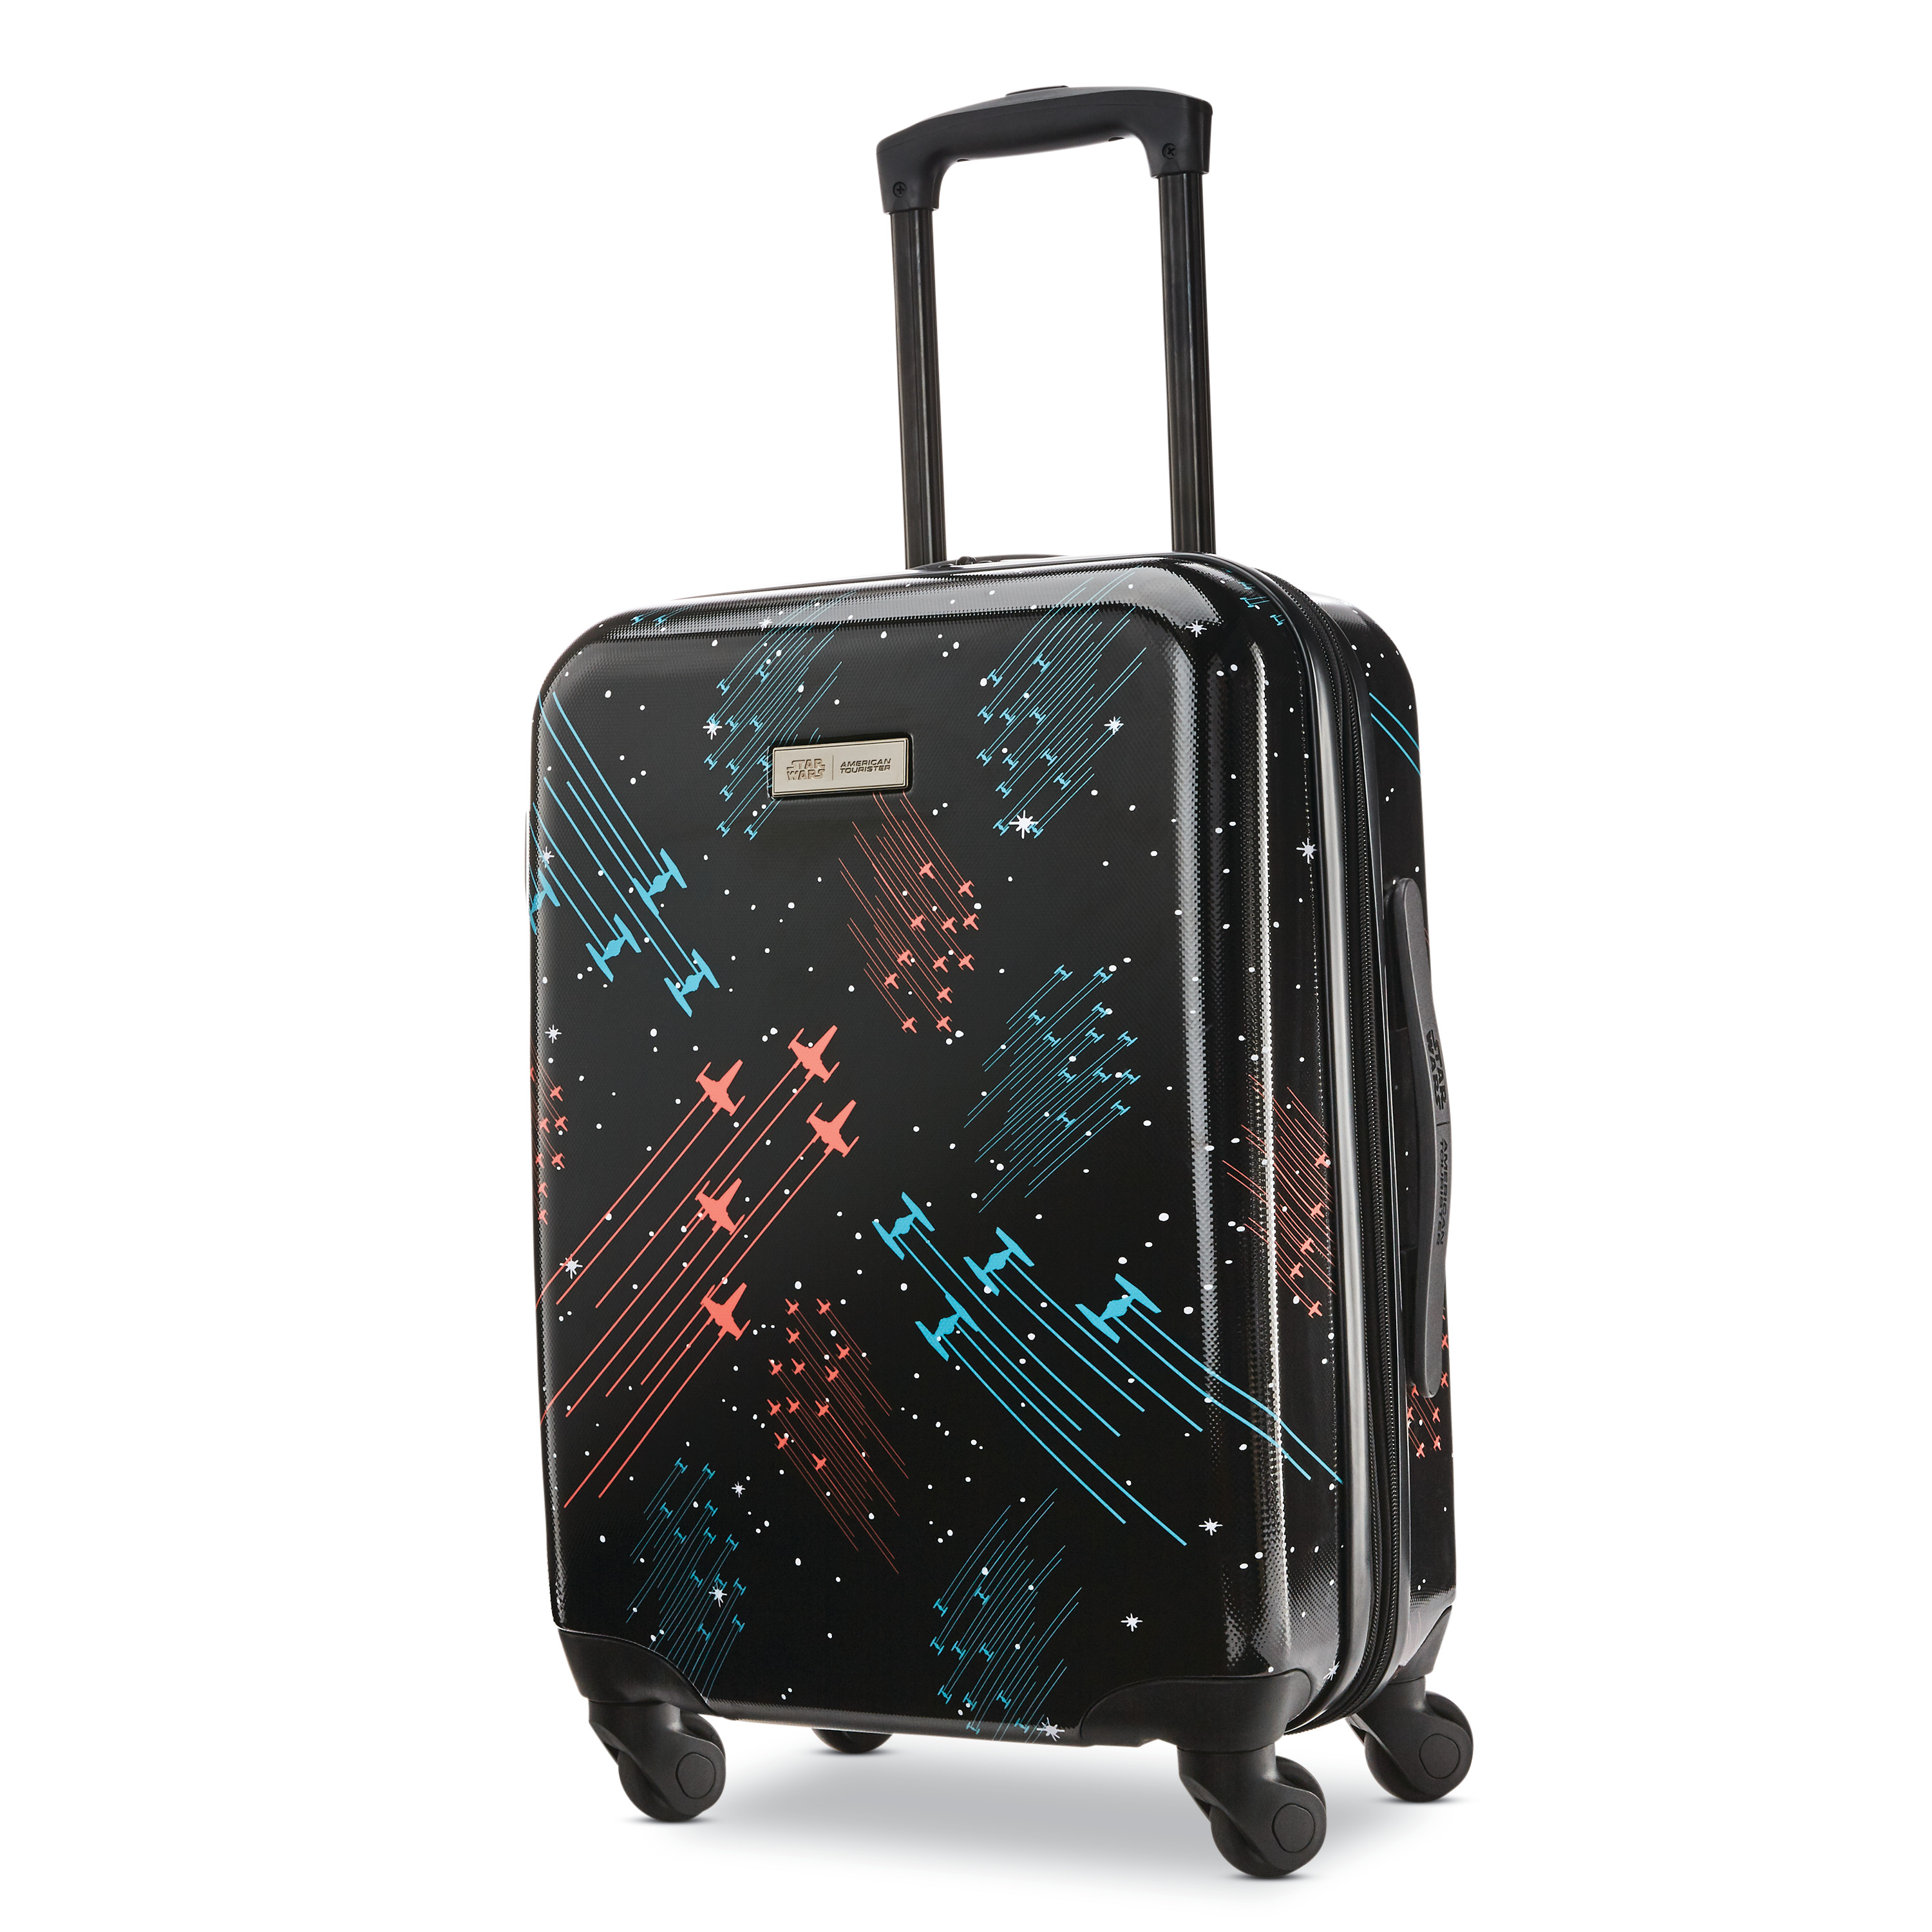 American Tourister Star Wars 21" Hardside Spinner Luggage - image 1 of 7